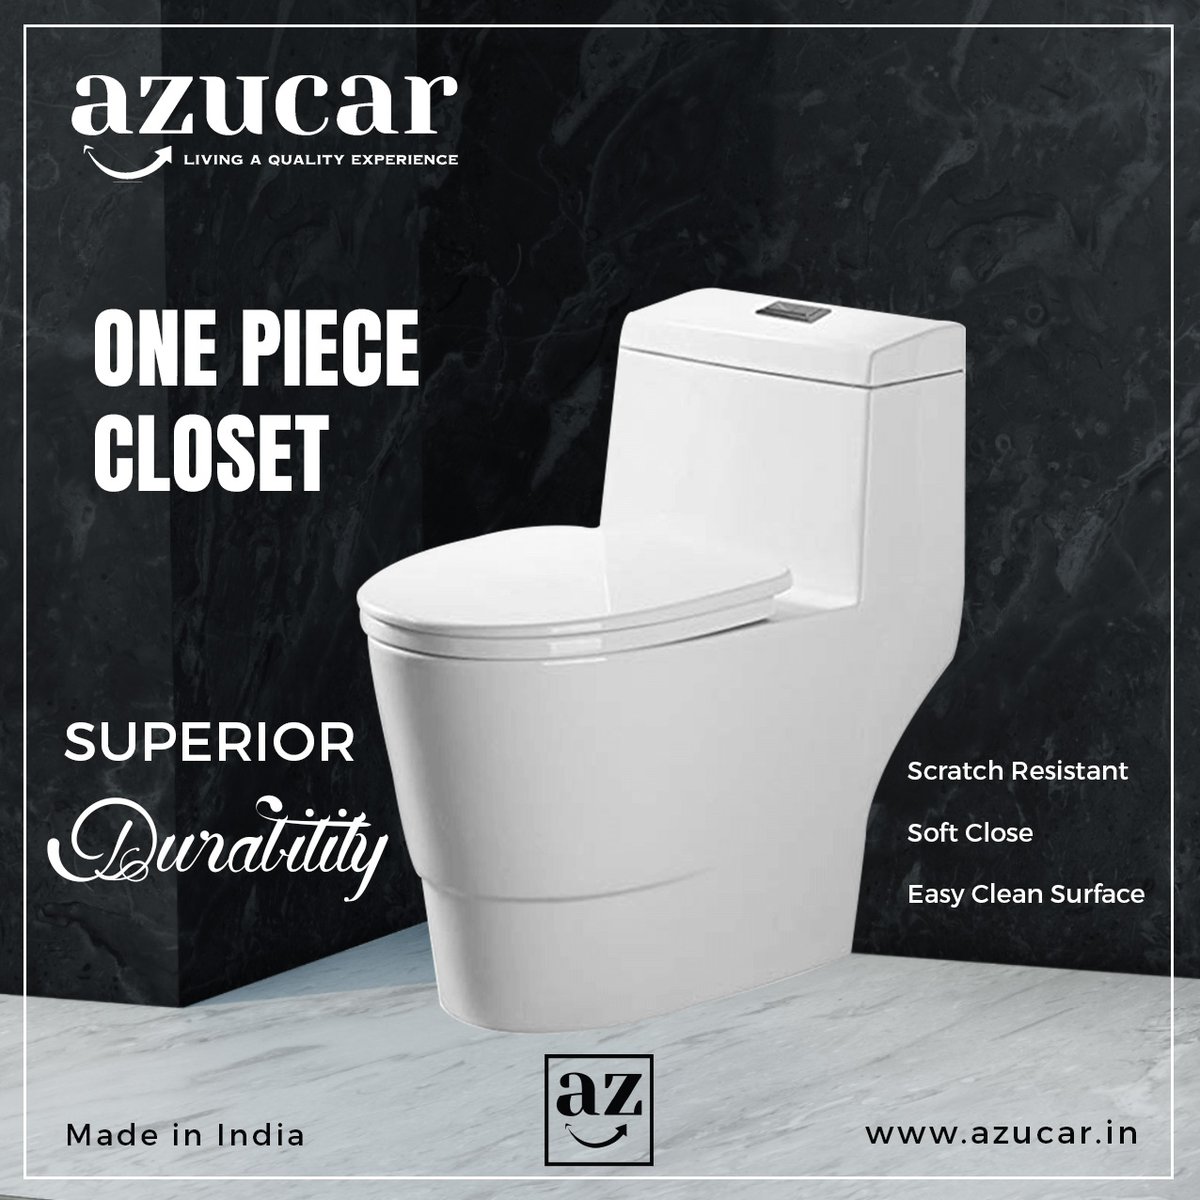 Azucar One Piece Toilet.

Complete your Modern Bathroom with our Contemporary Back to Wall, One Piece Toilet.

#sanitaryware #SanitaryWares #onepiecetoilet #sanitarybathroom #OnePieceWaterCloset #WaterCloset #toiletseat  #bathroomdecor #azucarindia #azucarsanitaryware #azucar